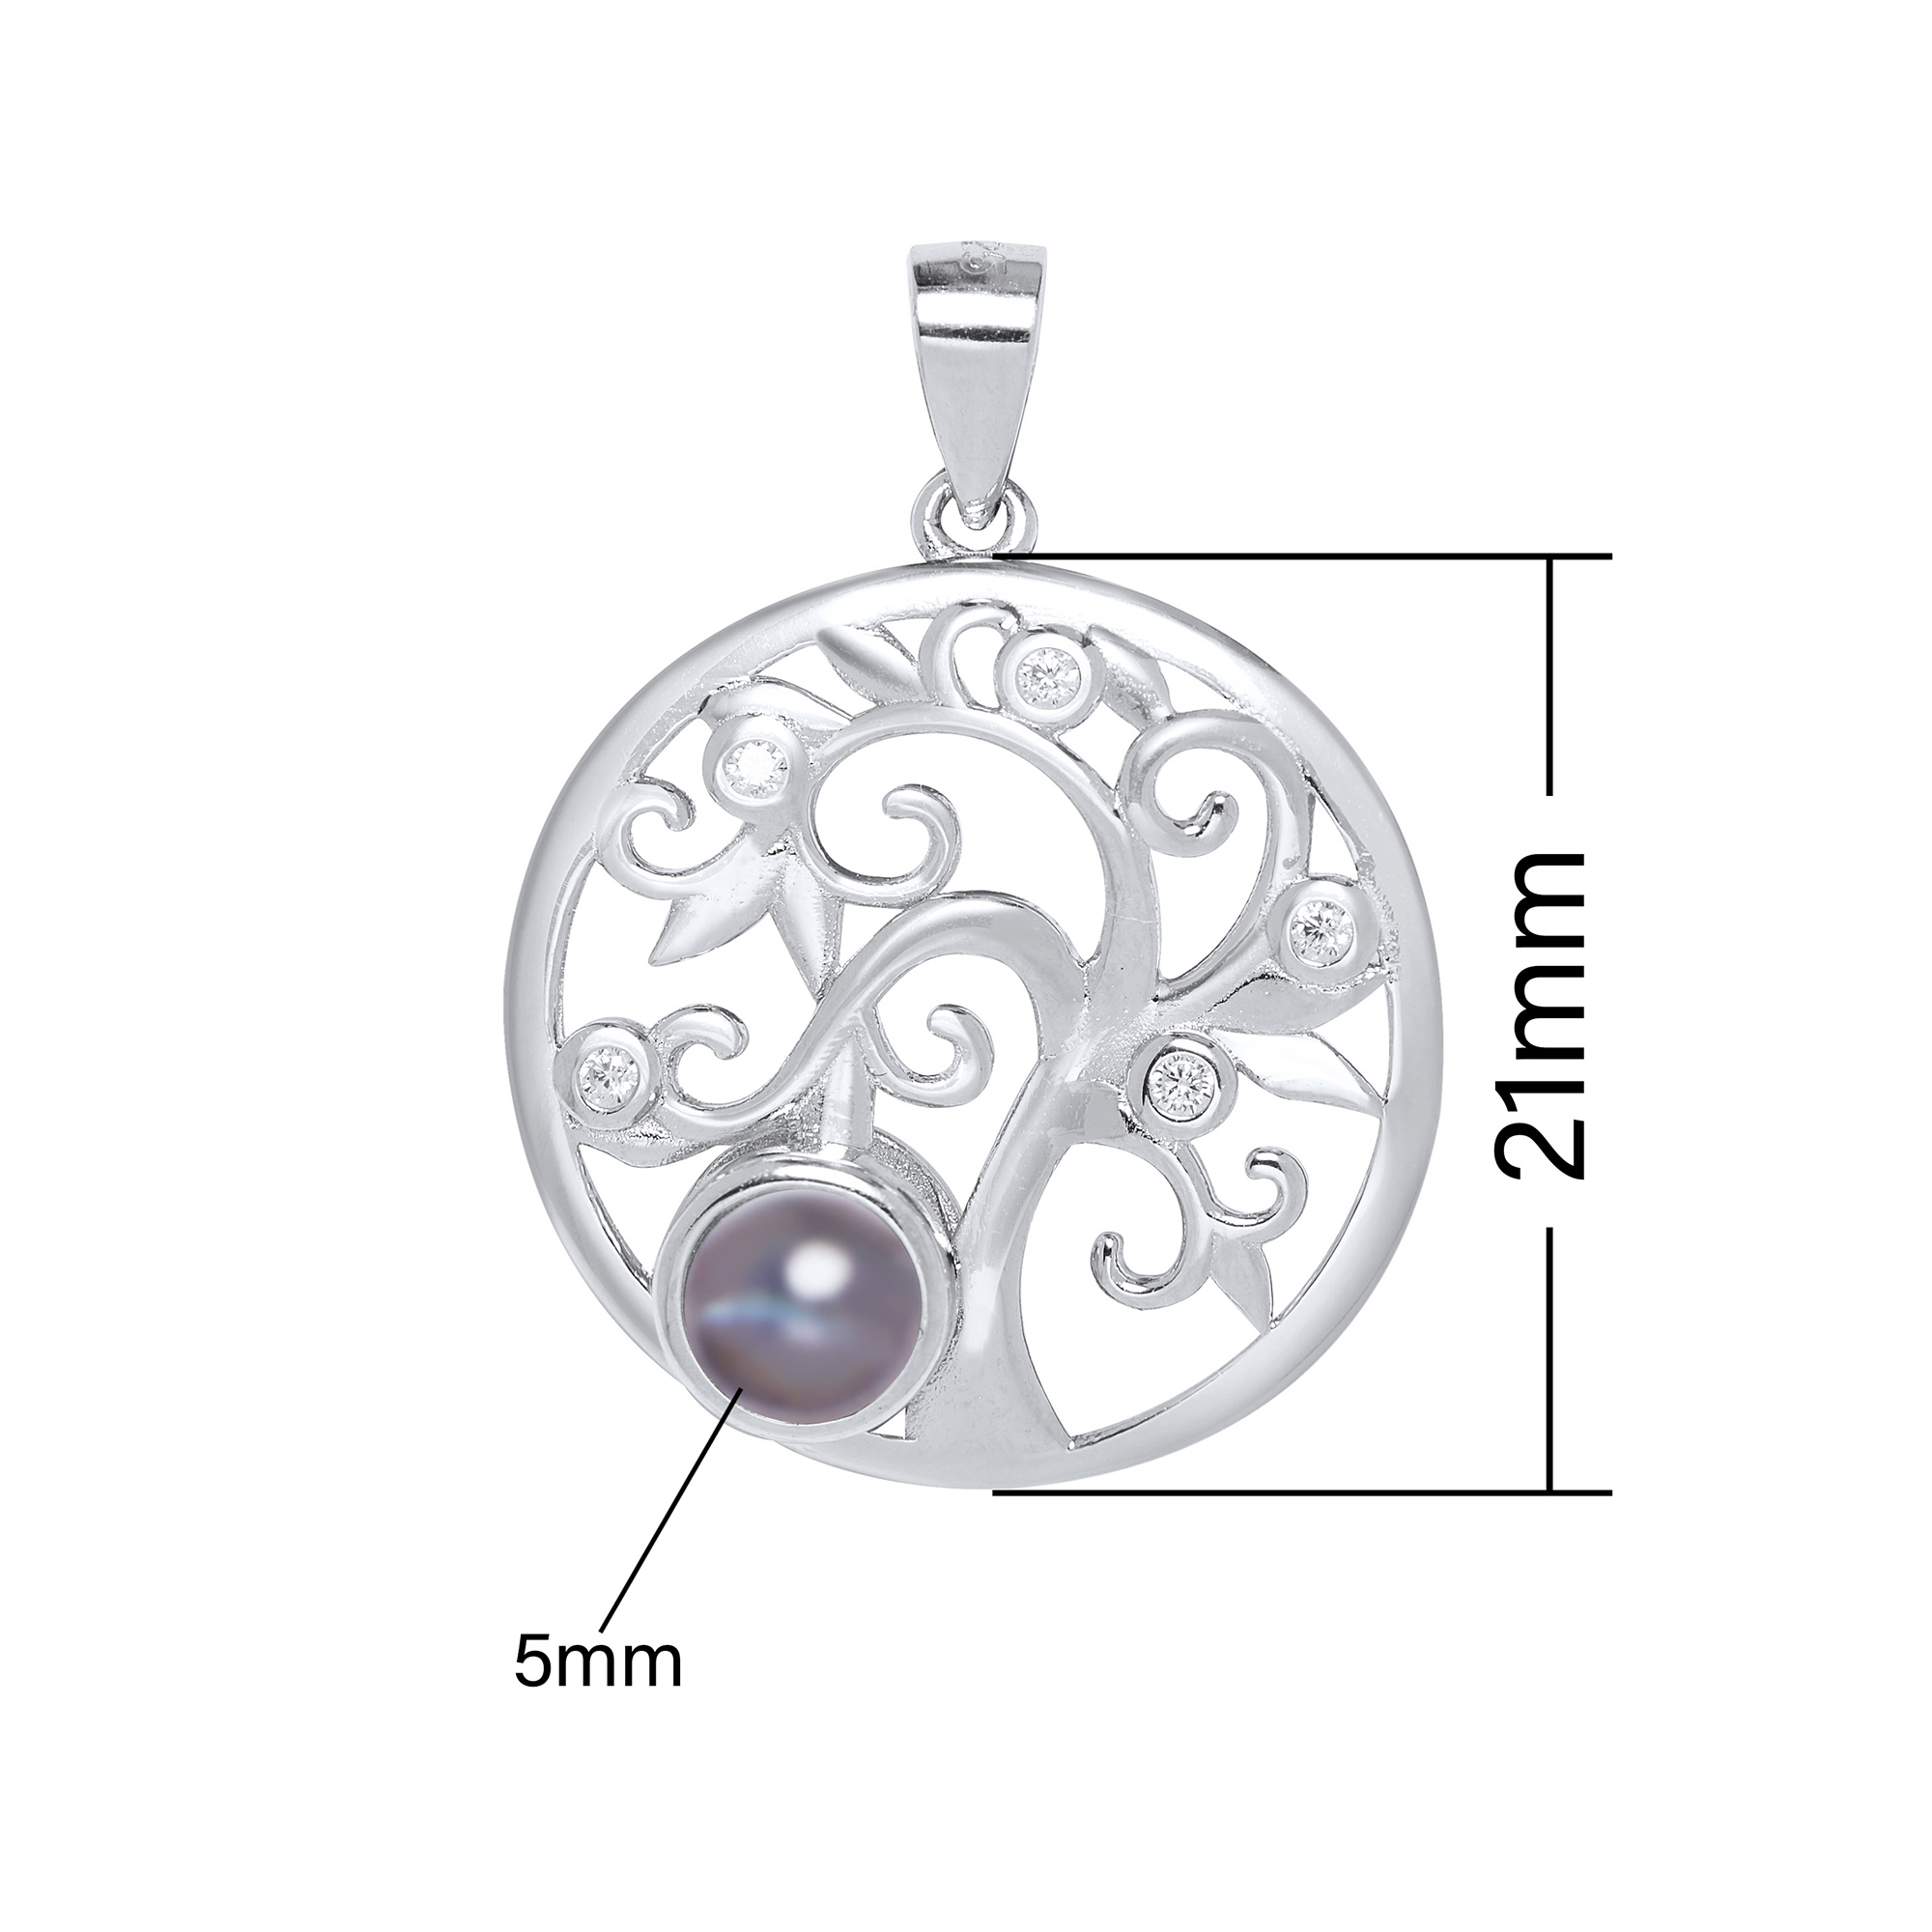 Keepsake Personalized Projection Tree of Life Pendant,Solid 925 Sterling Silver Round Charm,Custom Photo Memorial Photo Jewelry Supplies 1431271 - Click Image to Close